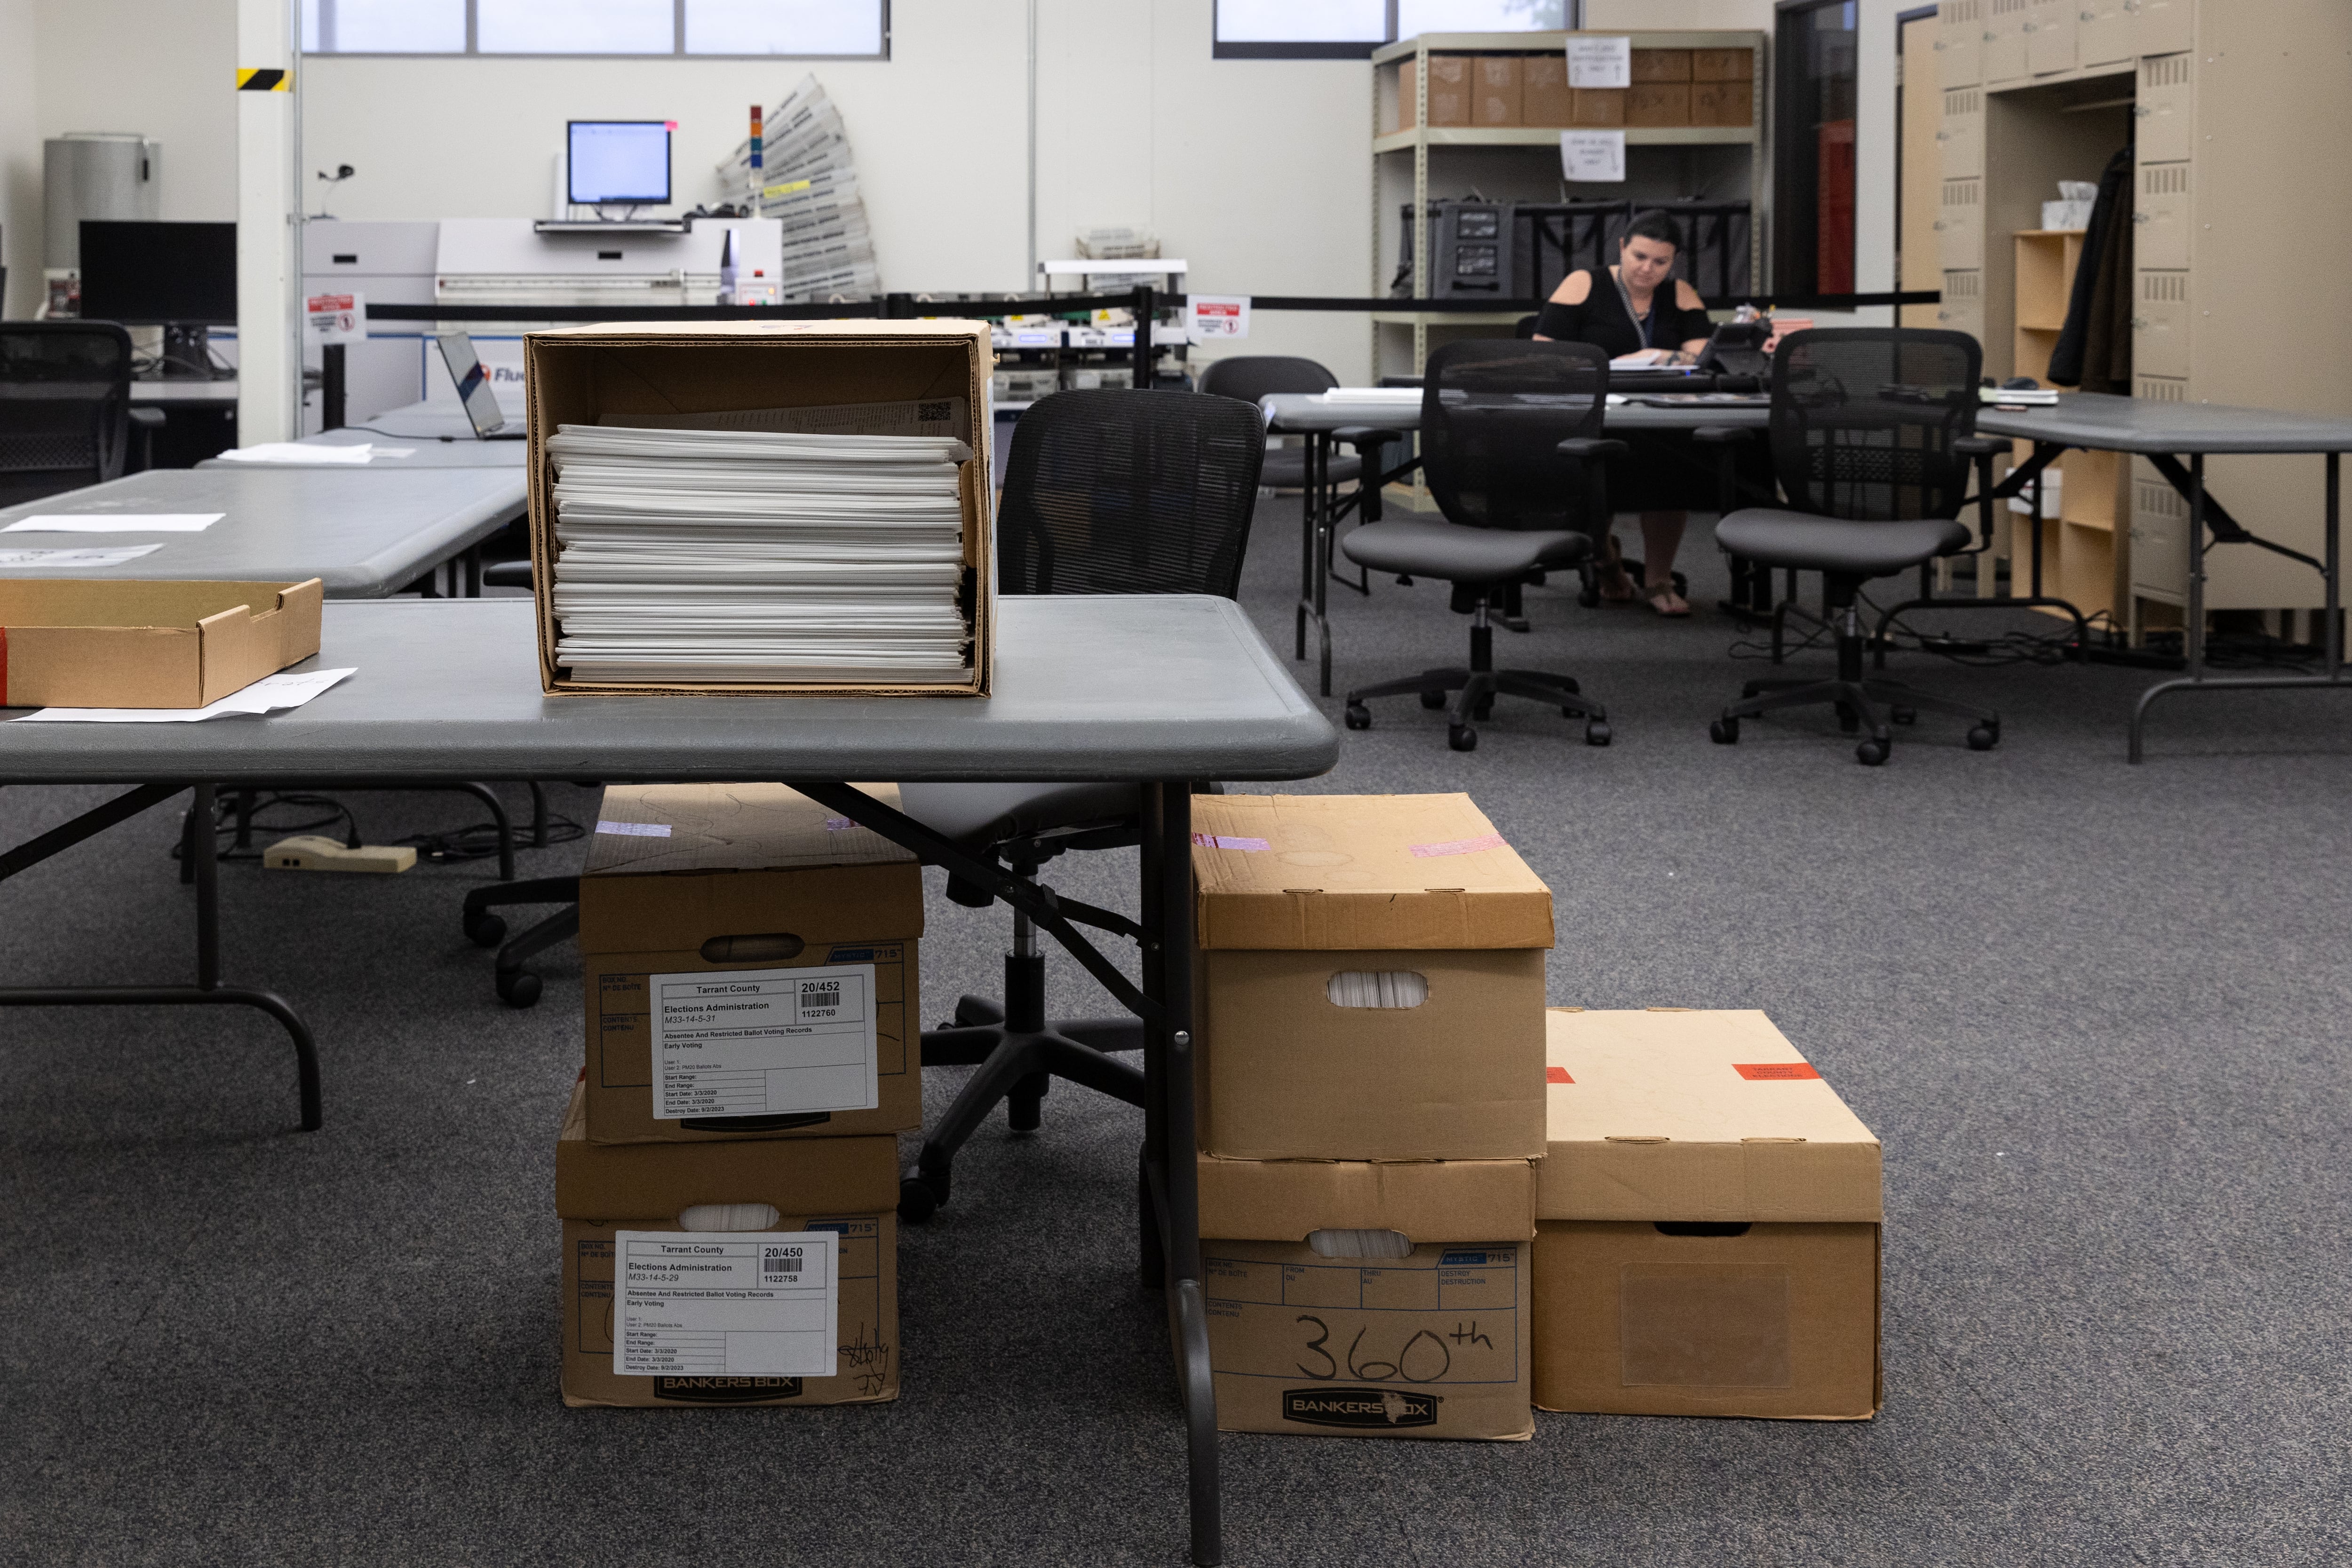 A pile of boxes and stacks of paper in an office